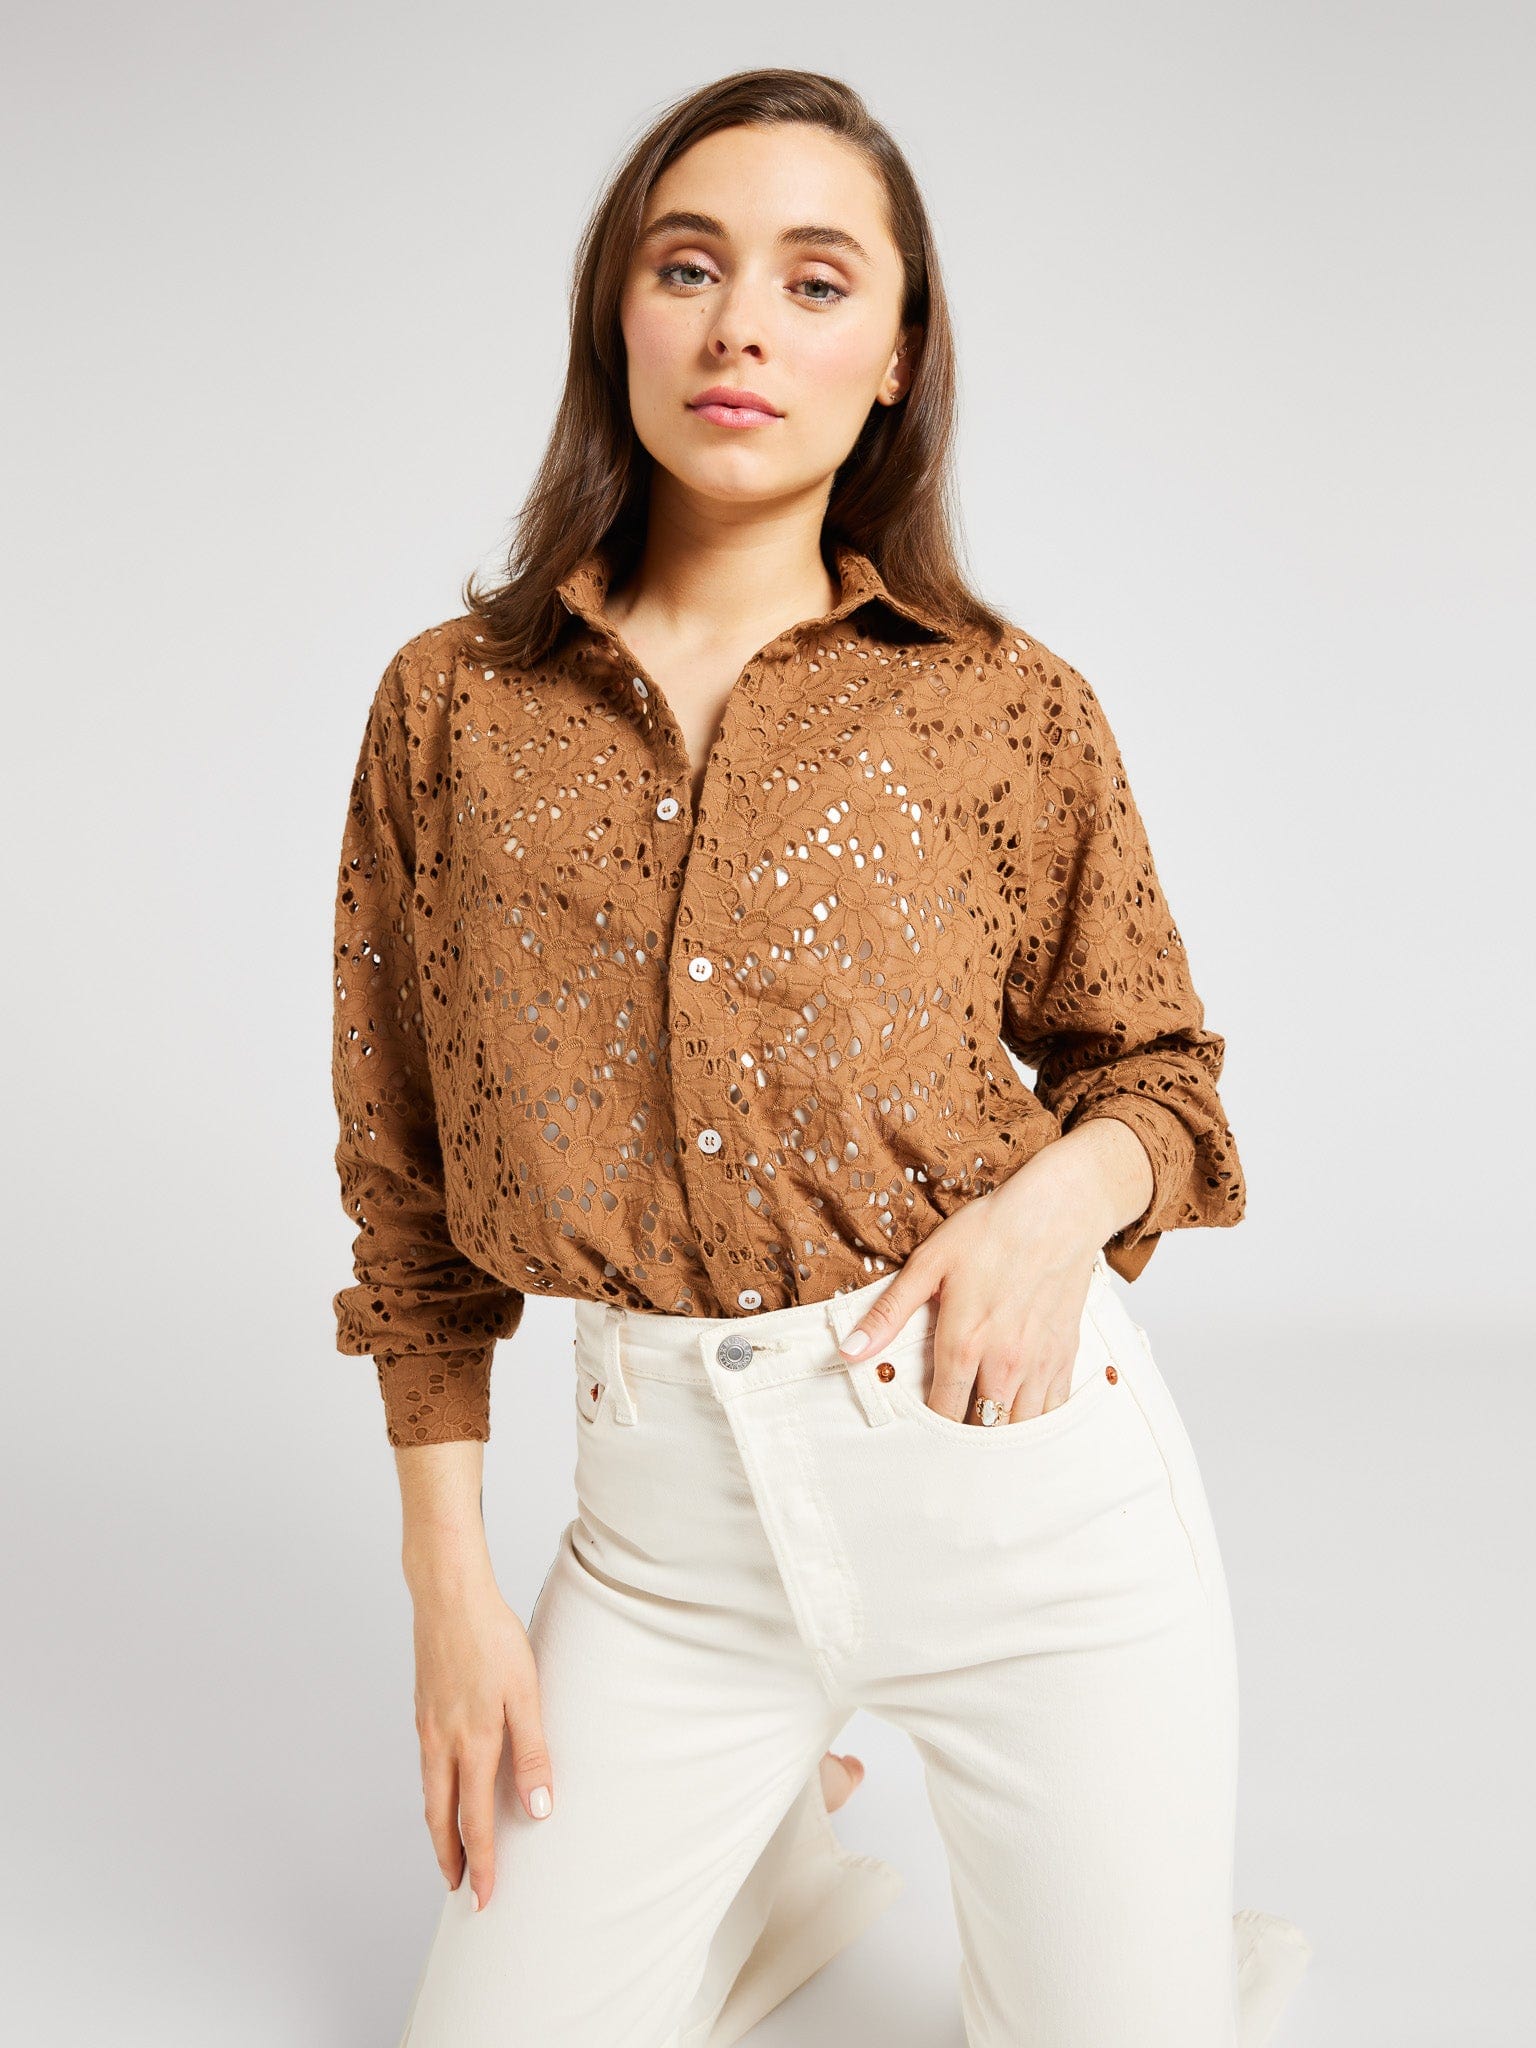 MILLE Clothing Sofia Top in Caramel Eyelet